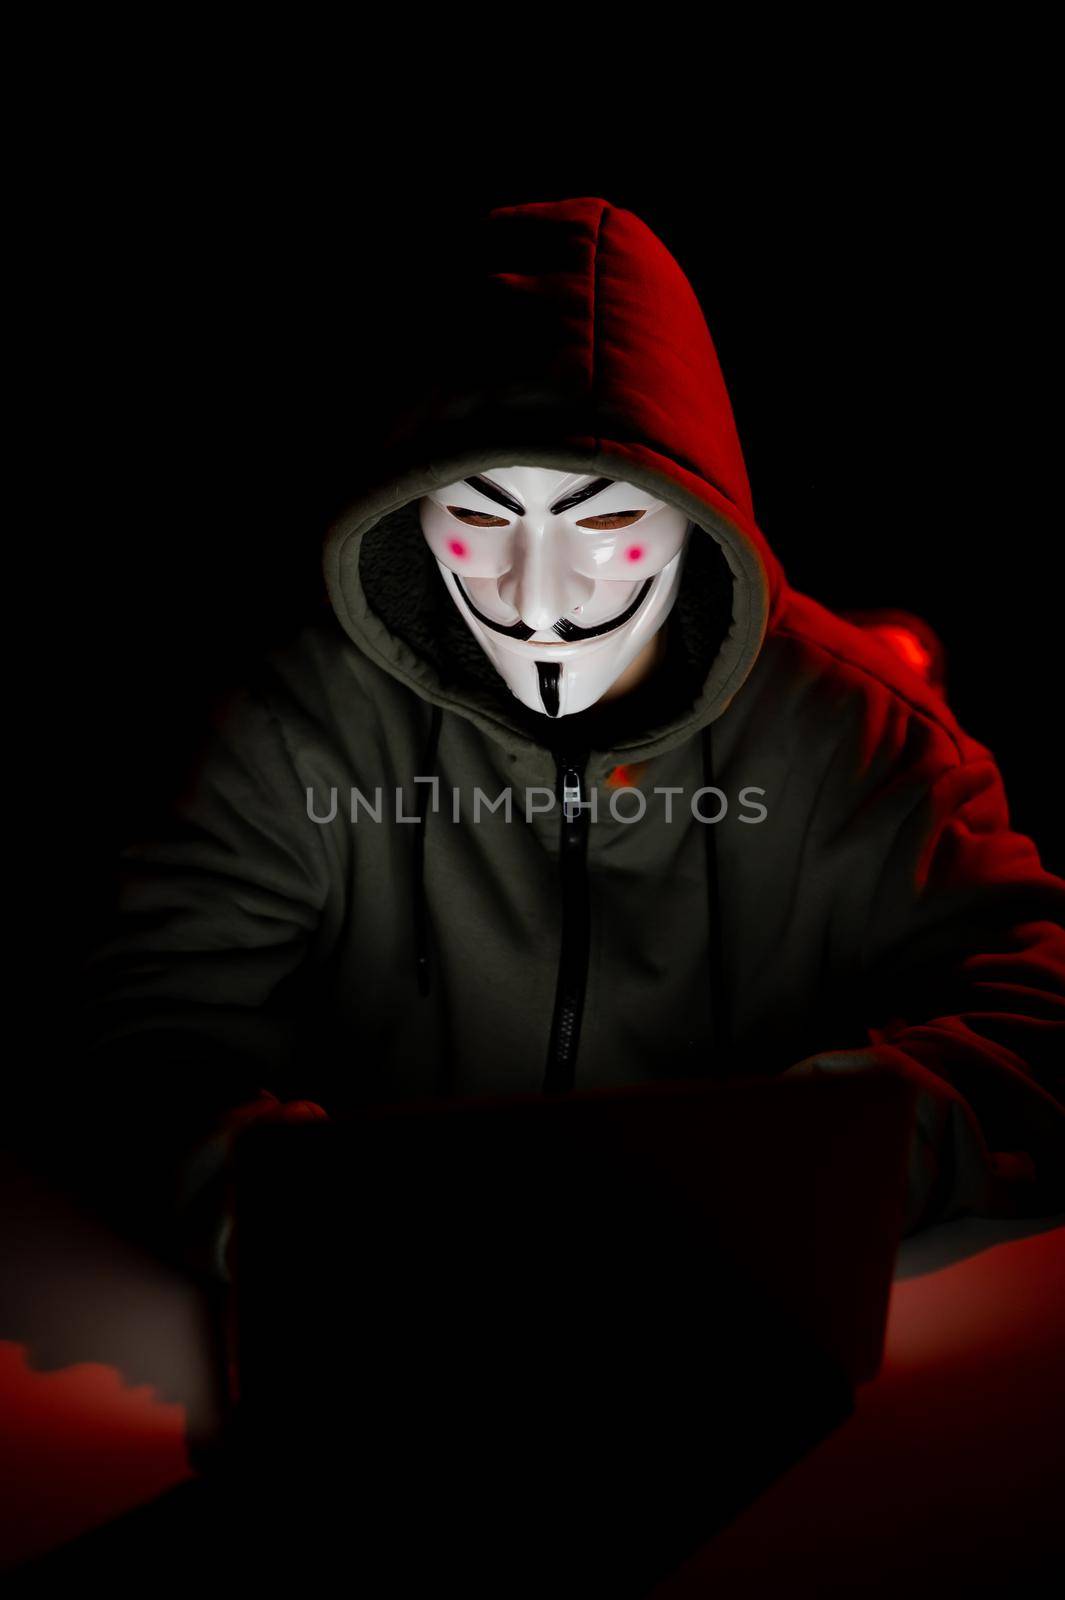 June 5, 2022 Novosibirsk, Russia: Anonymous in a hood is typing on a laptop in the dark in red light. by mrwed54